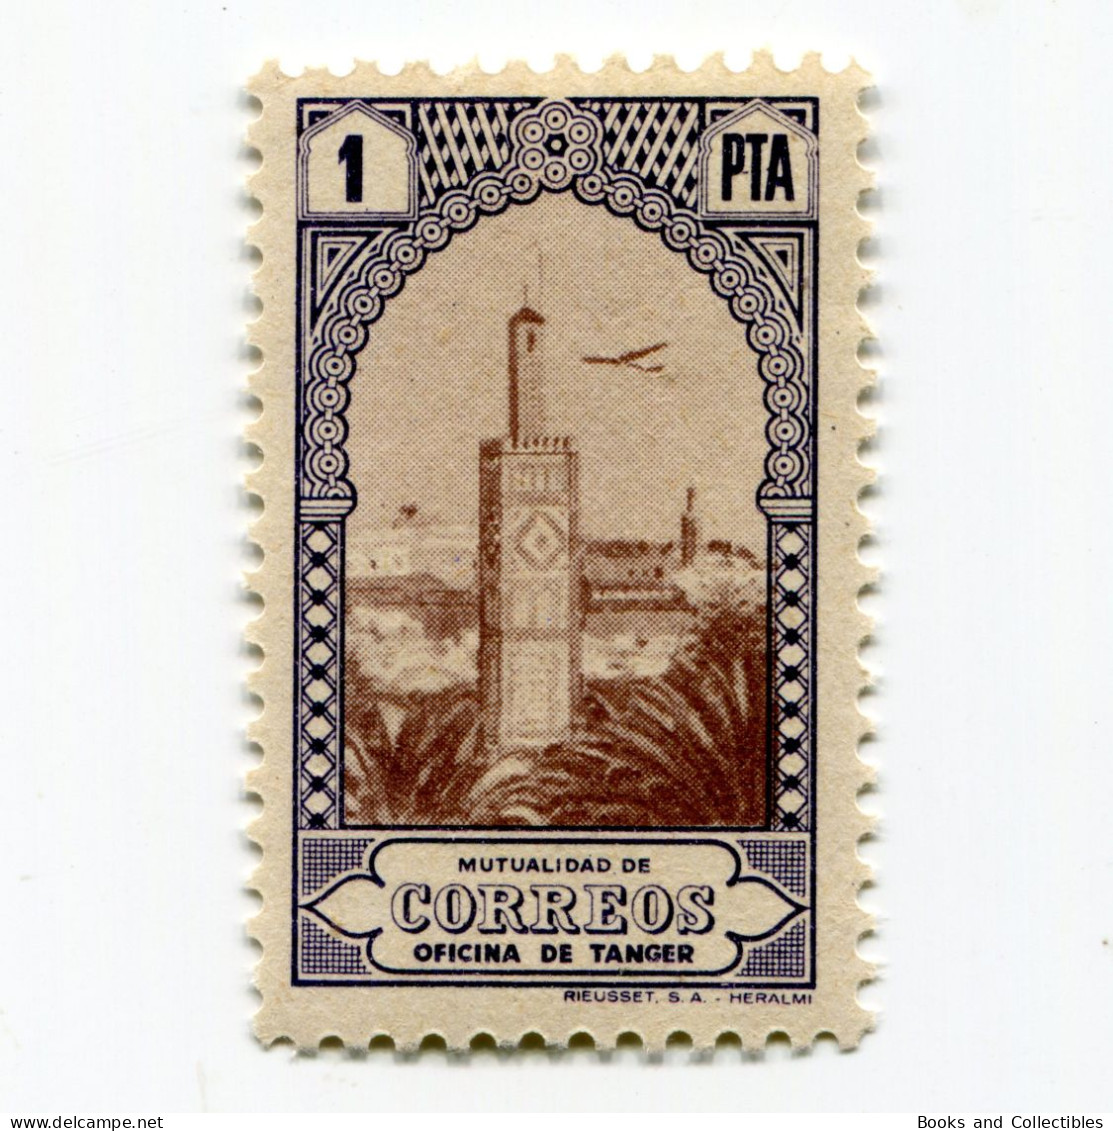 [FBL ● A-01] SPANISH TANGIER - 1946 - Beneficent Stamps - 1 Pta - Edifil ES-TNG BE32 - Liefdadigheid